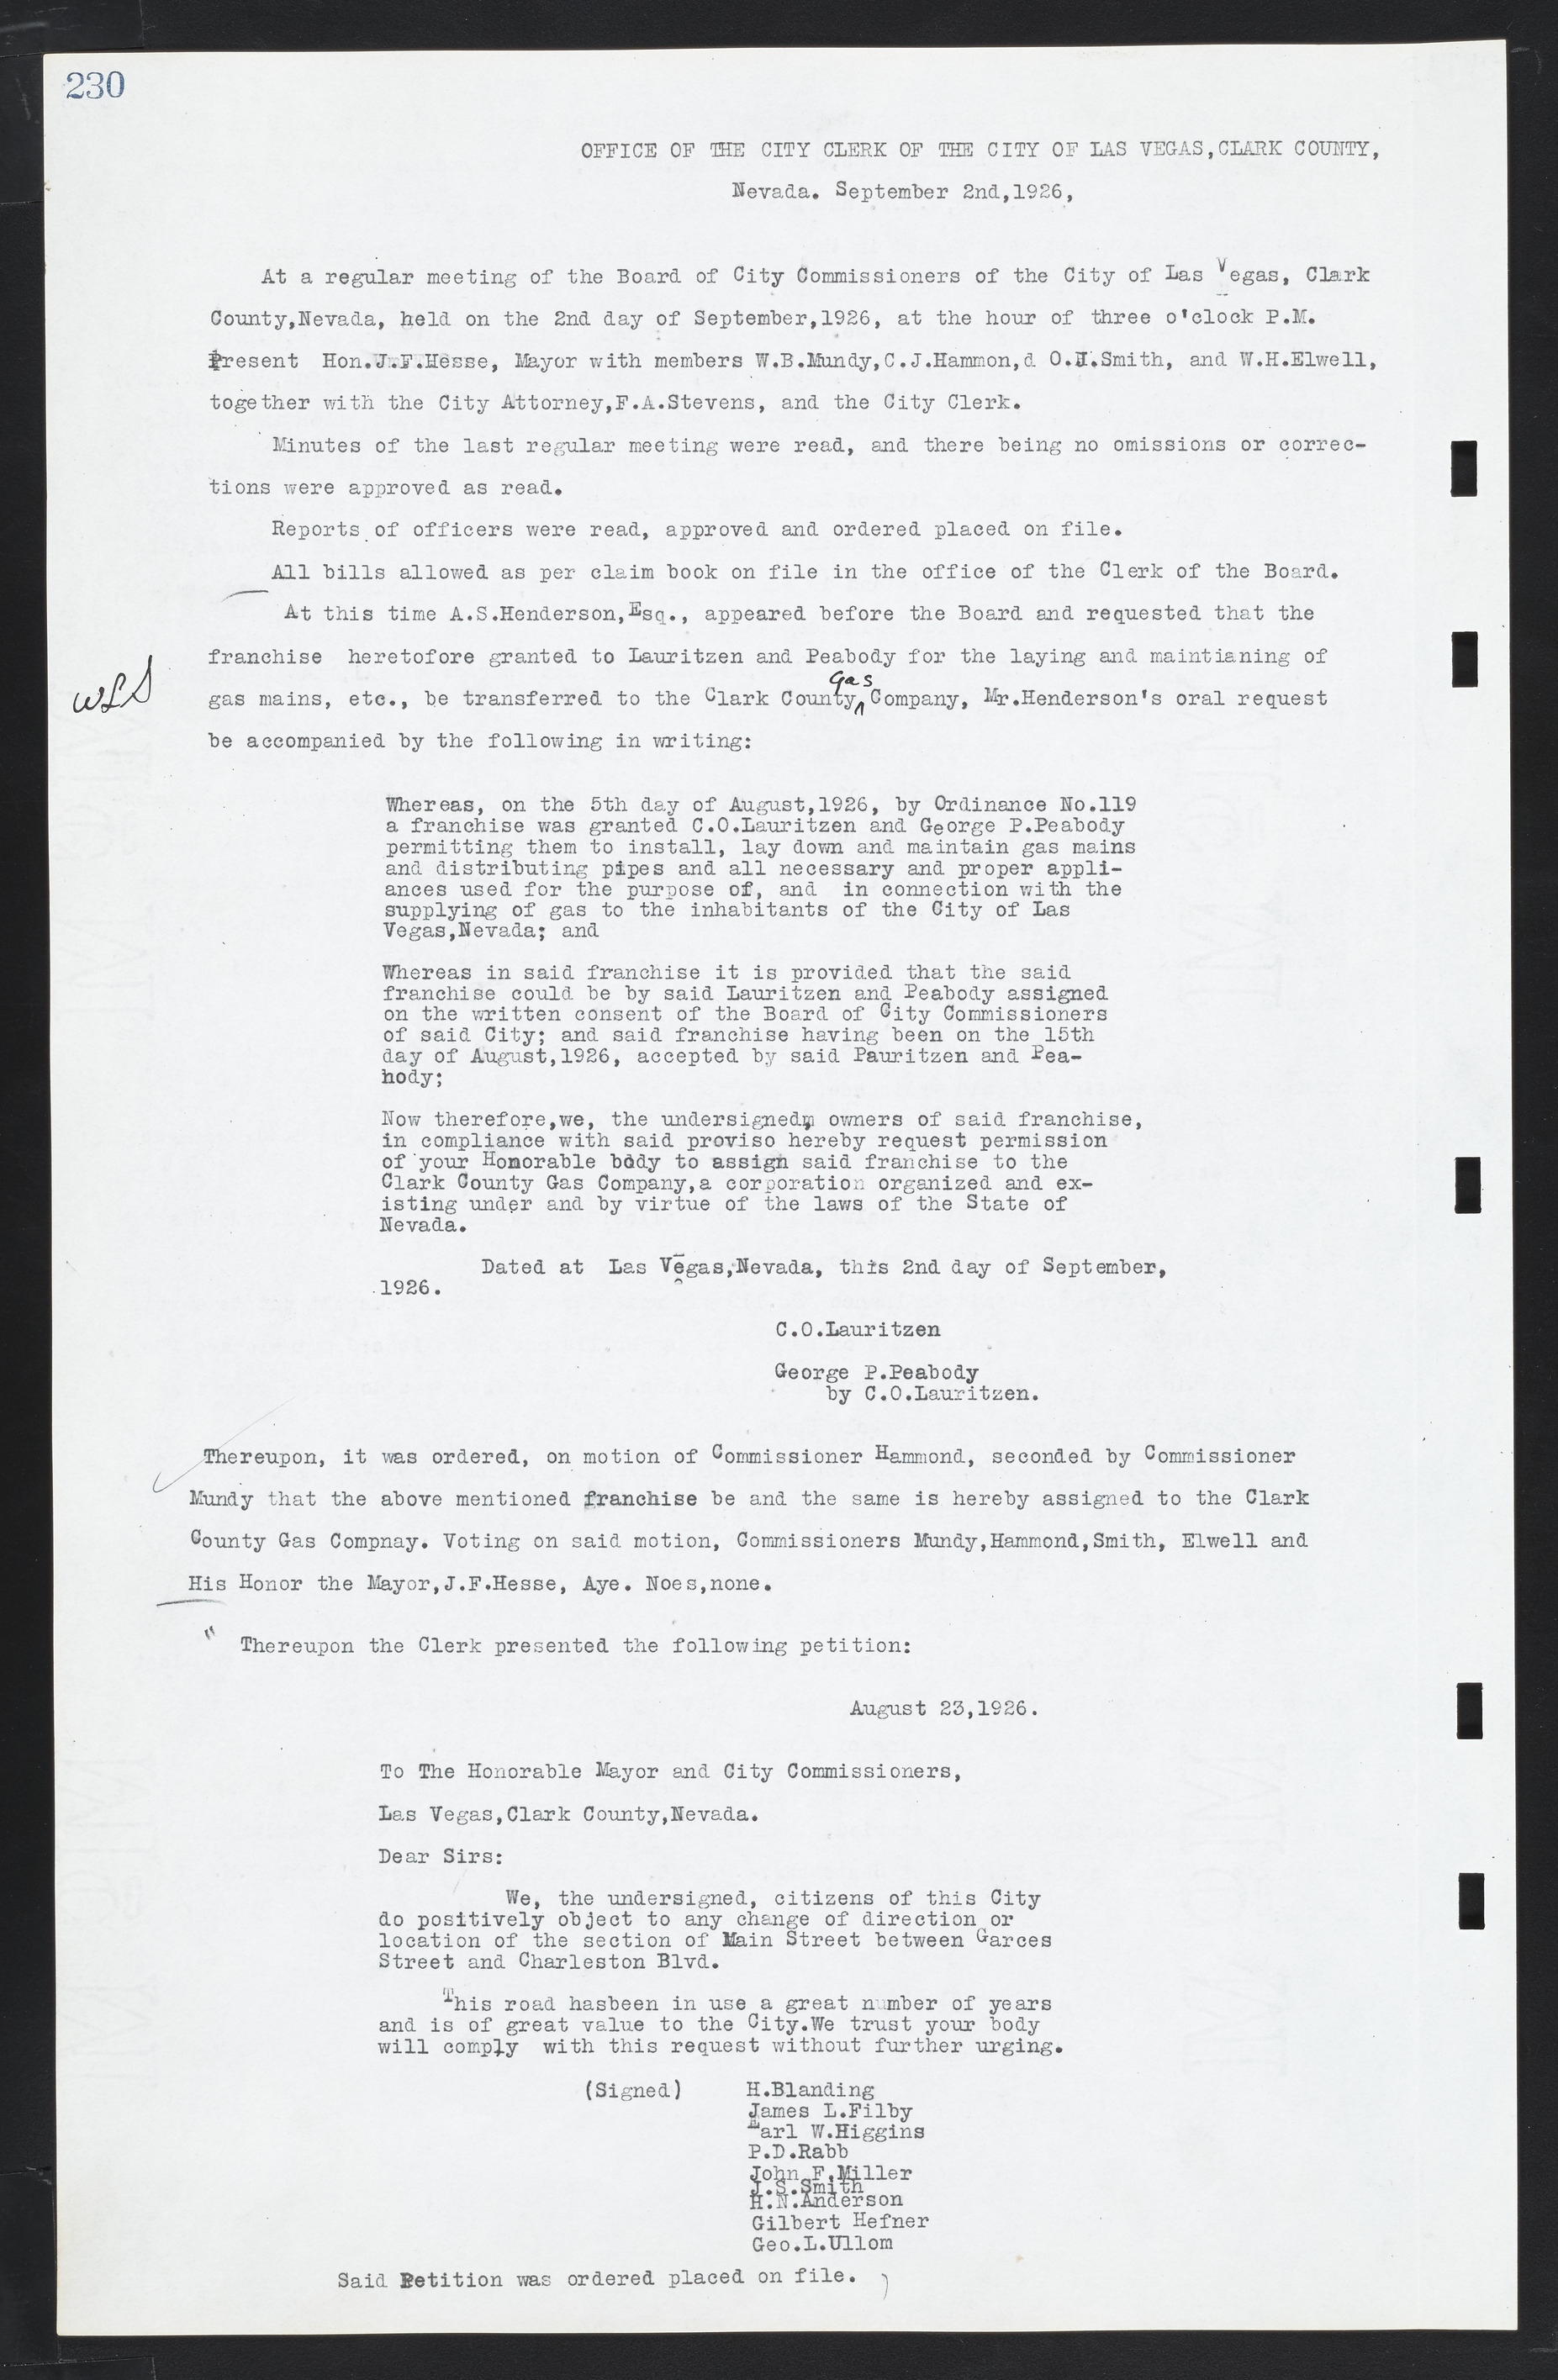 Las Vegas City Commission Minutes, March 1, 1922 to May 10, 1929, lvc000002-237